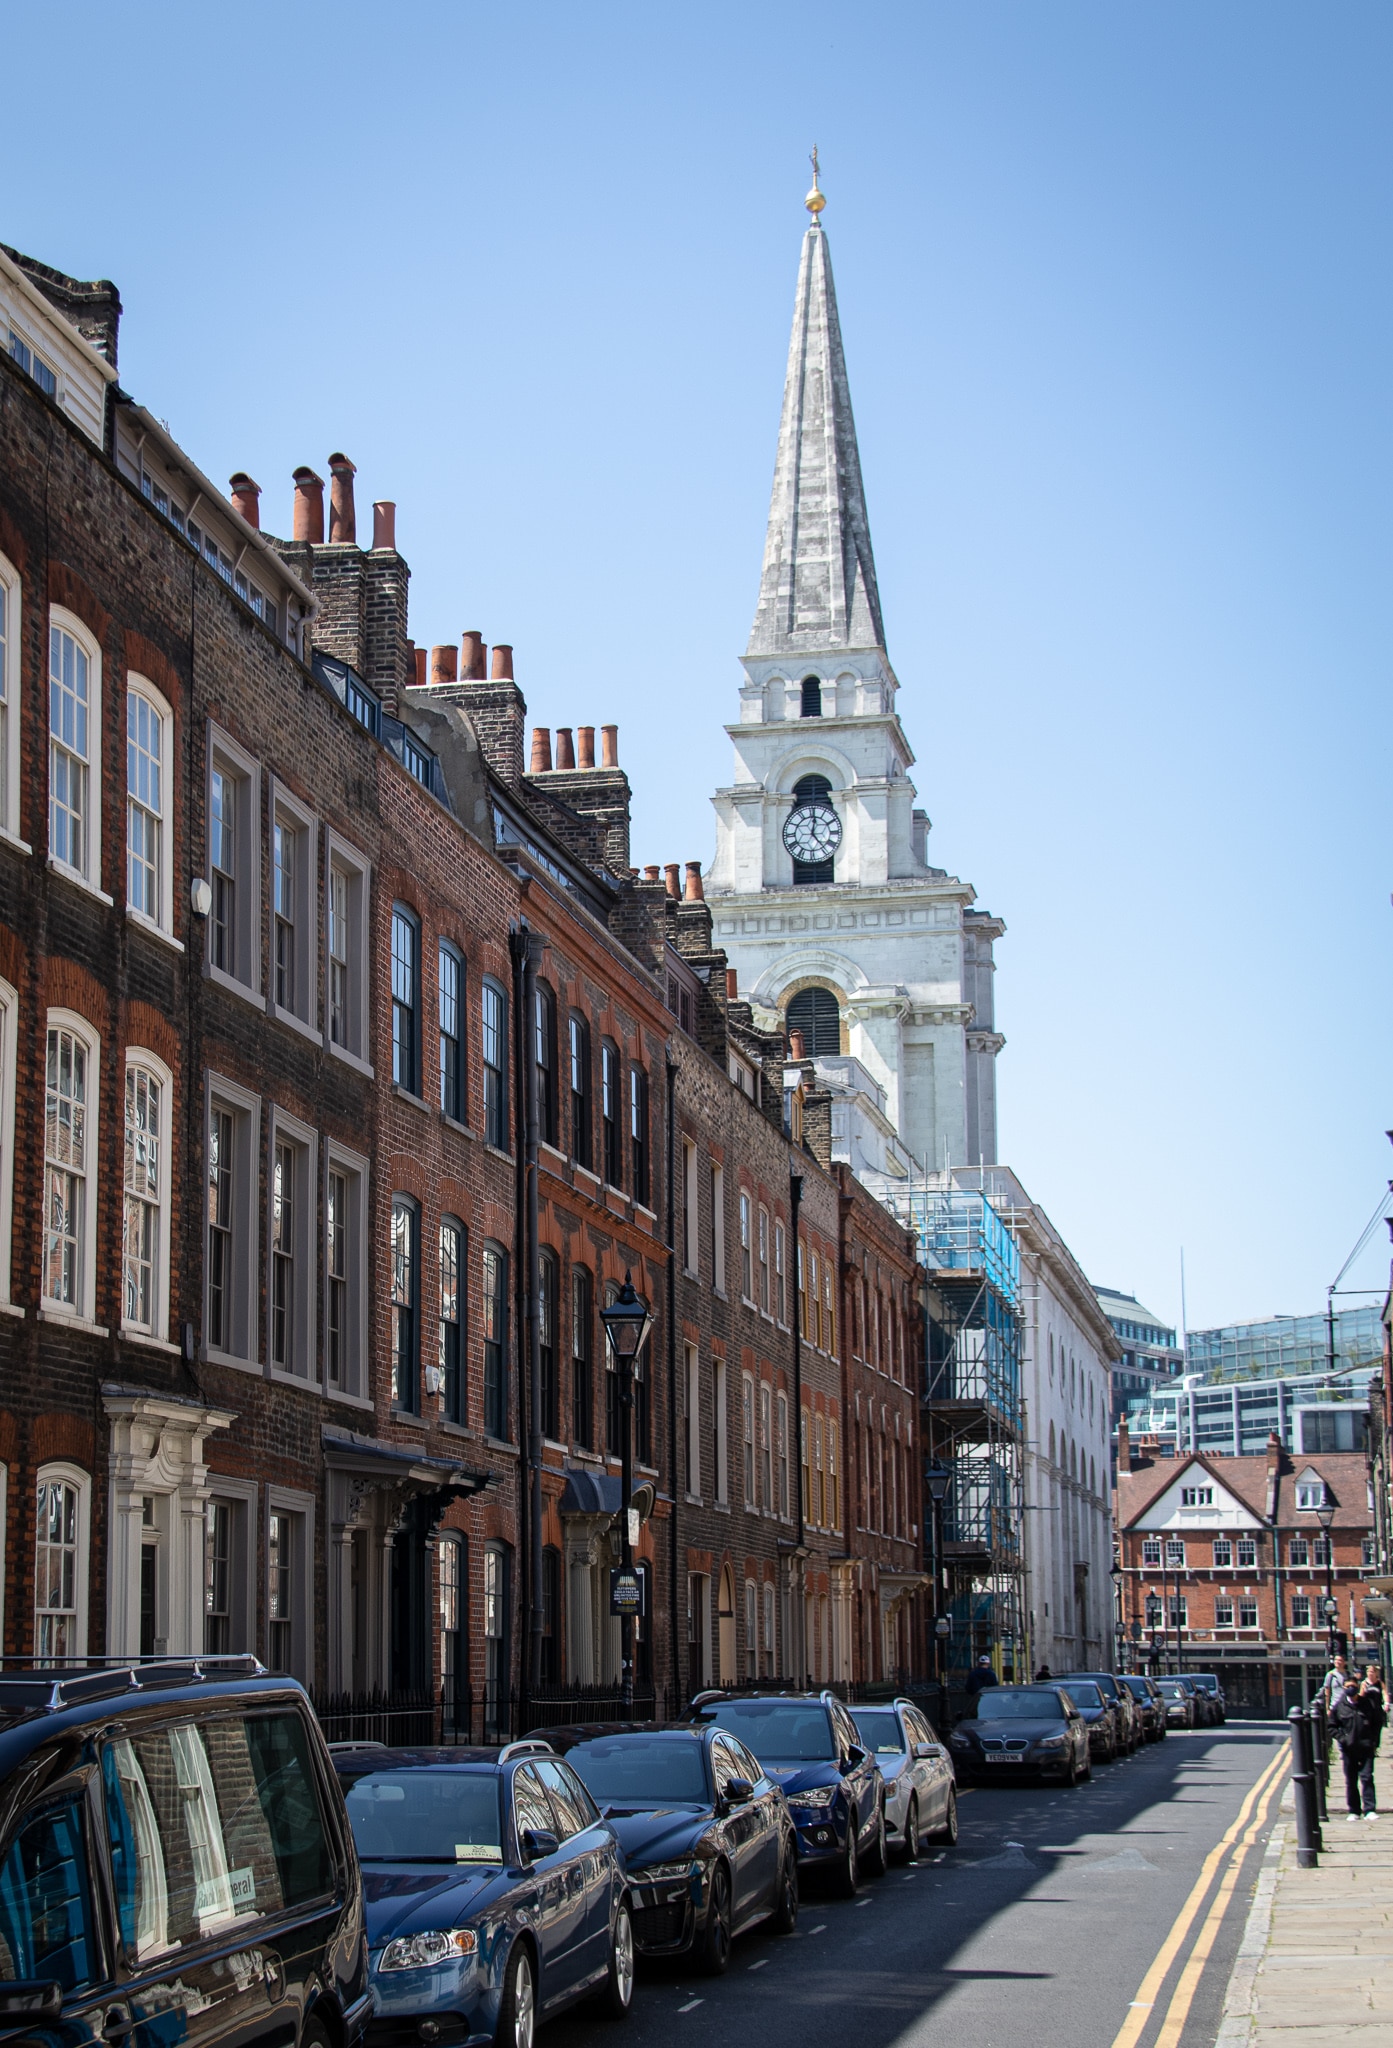 Christ Church in Spitalfields towers over the 19th century brick housing in the streets close to Brick Lane. 